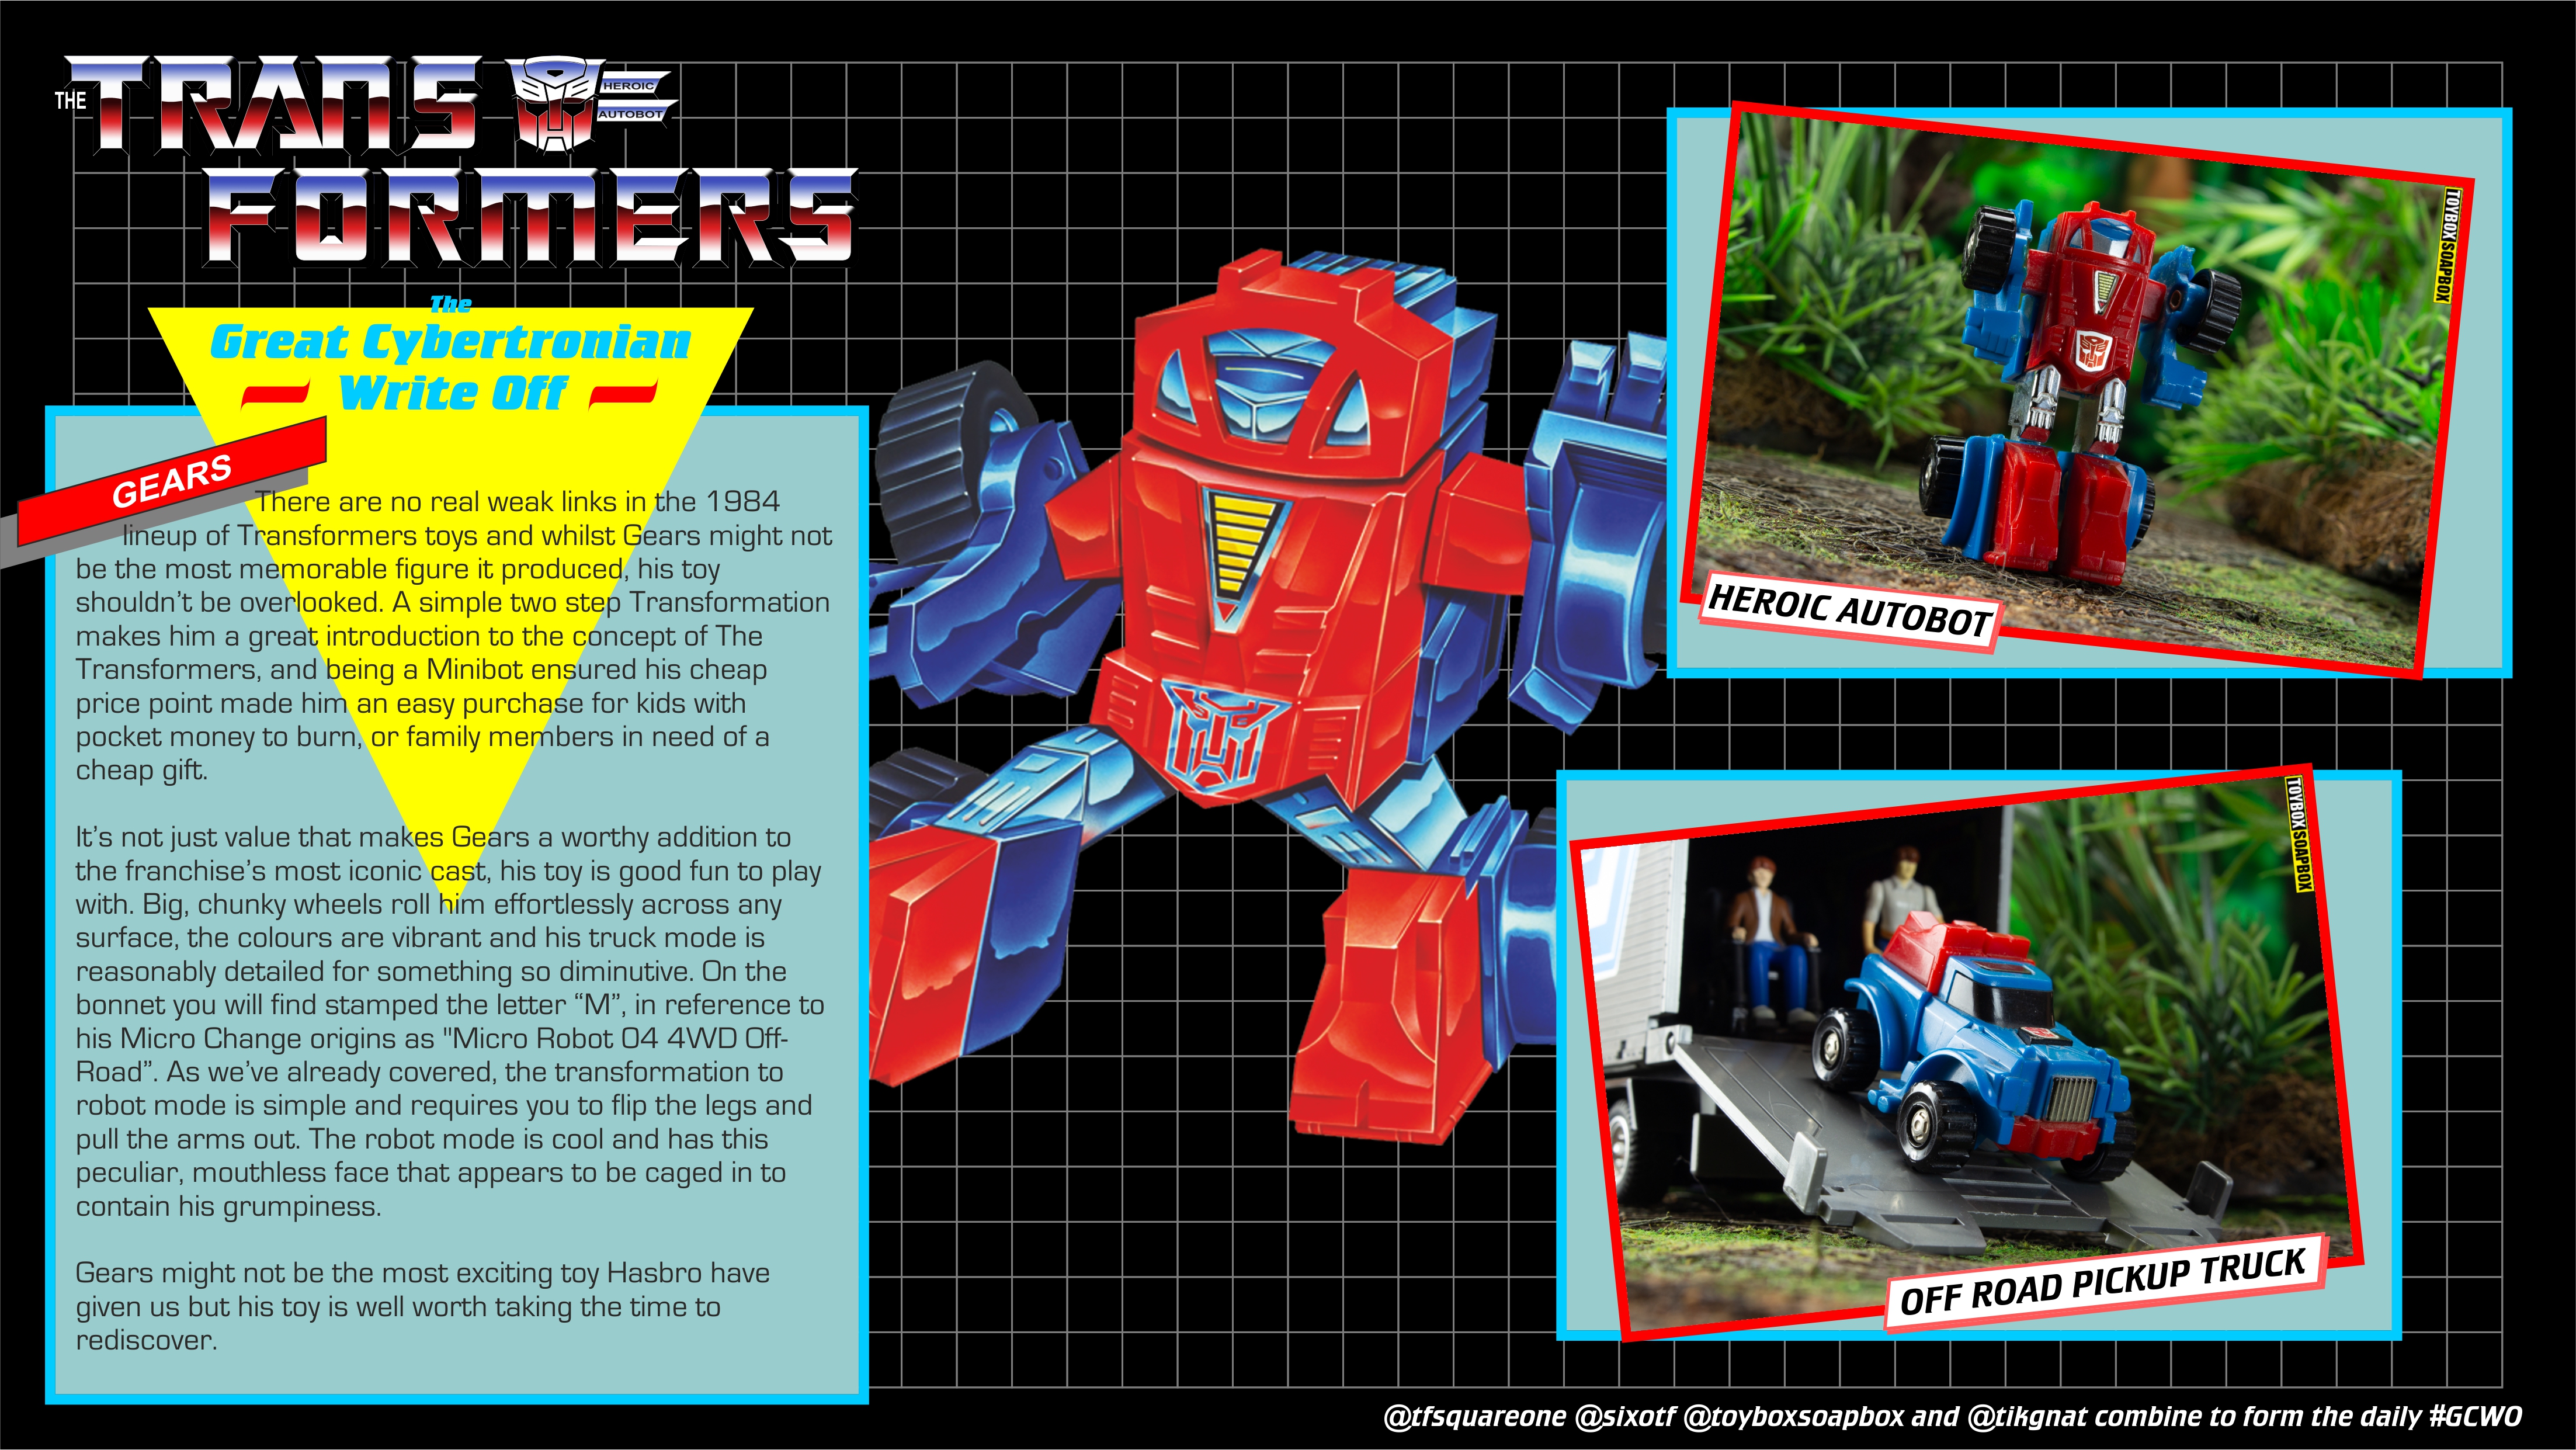 gears-g1-transformers-review